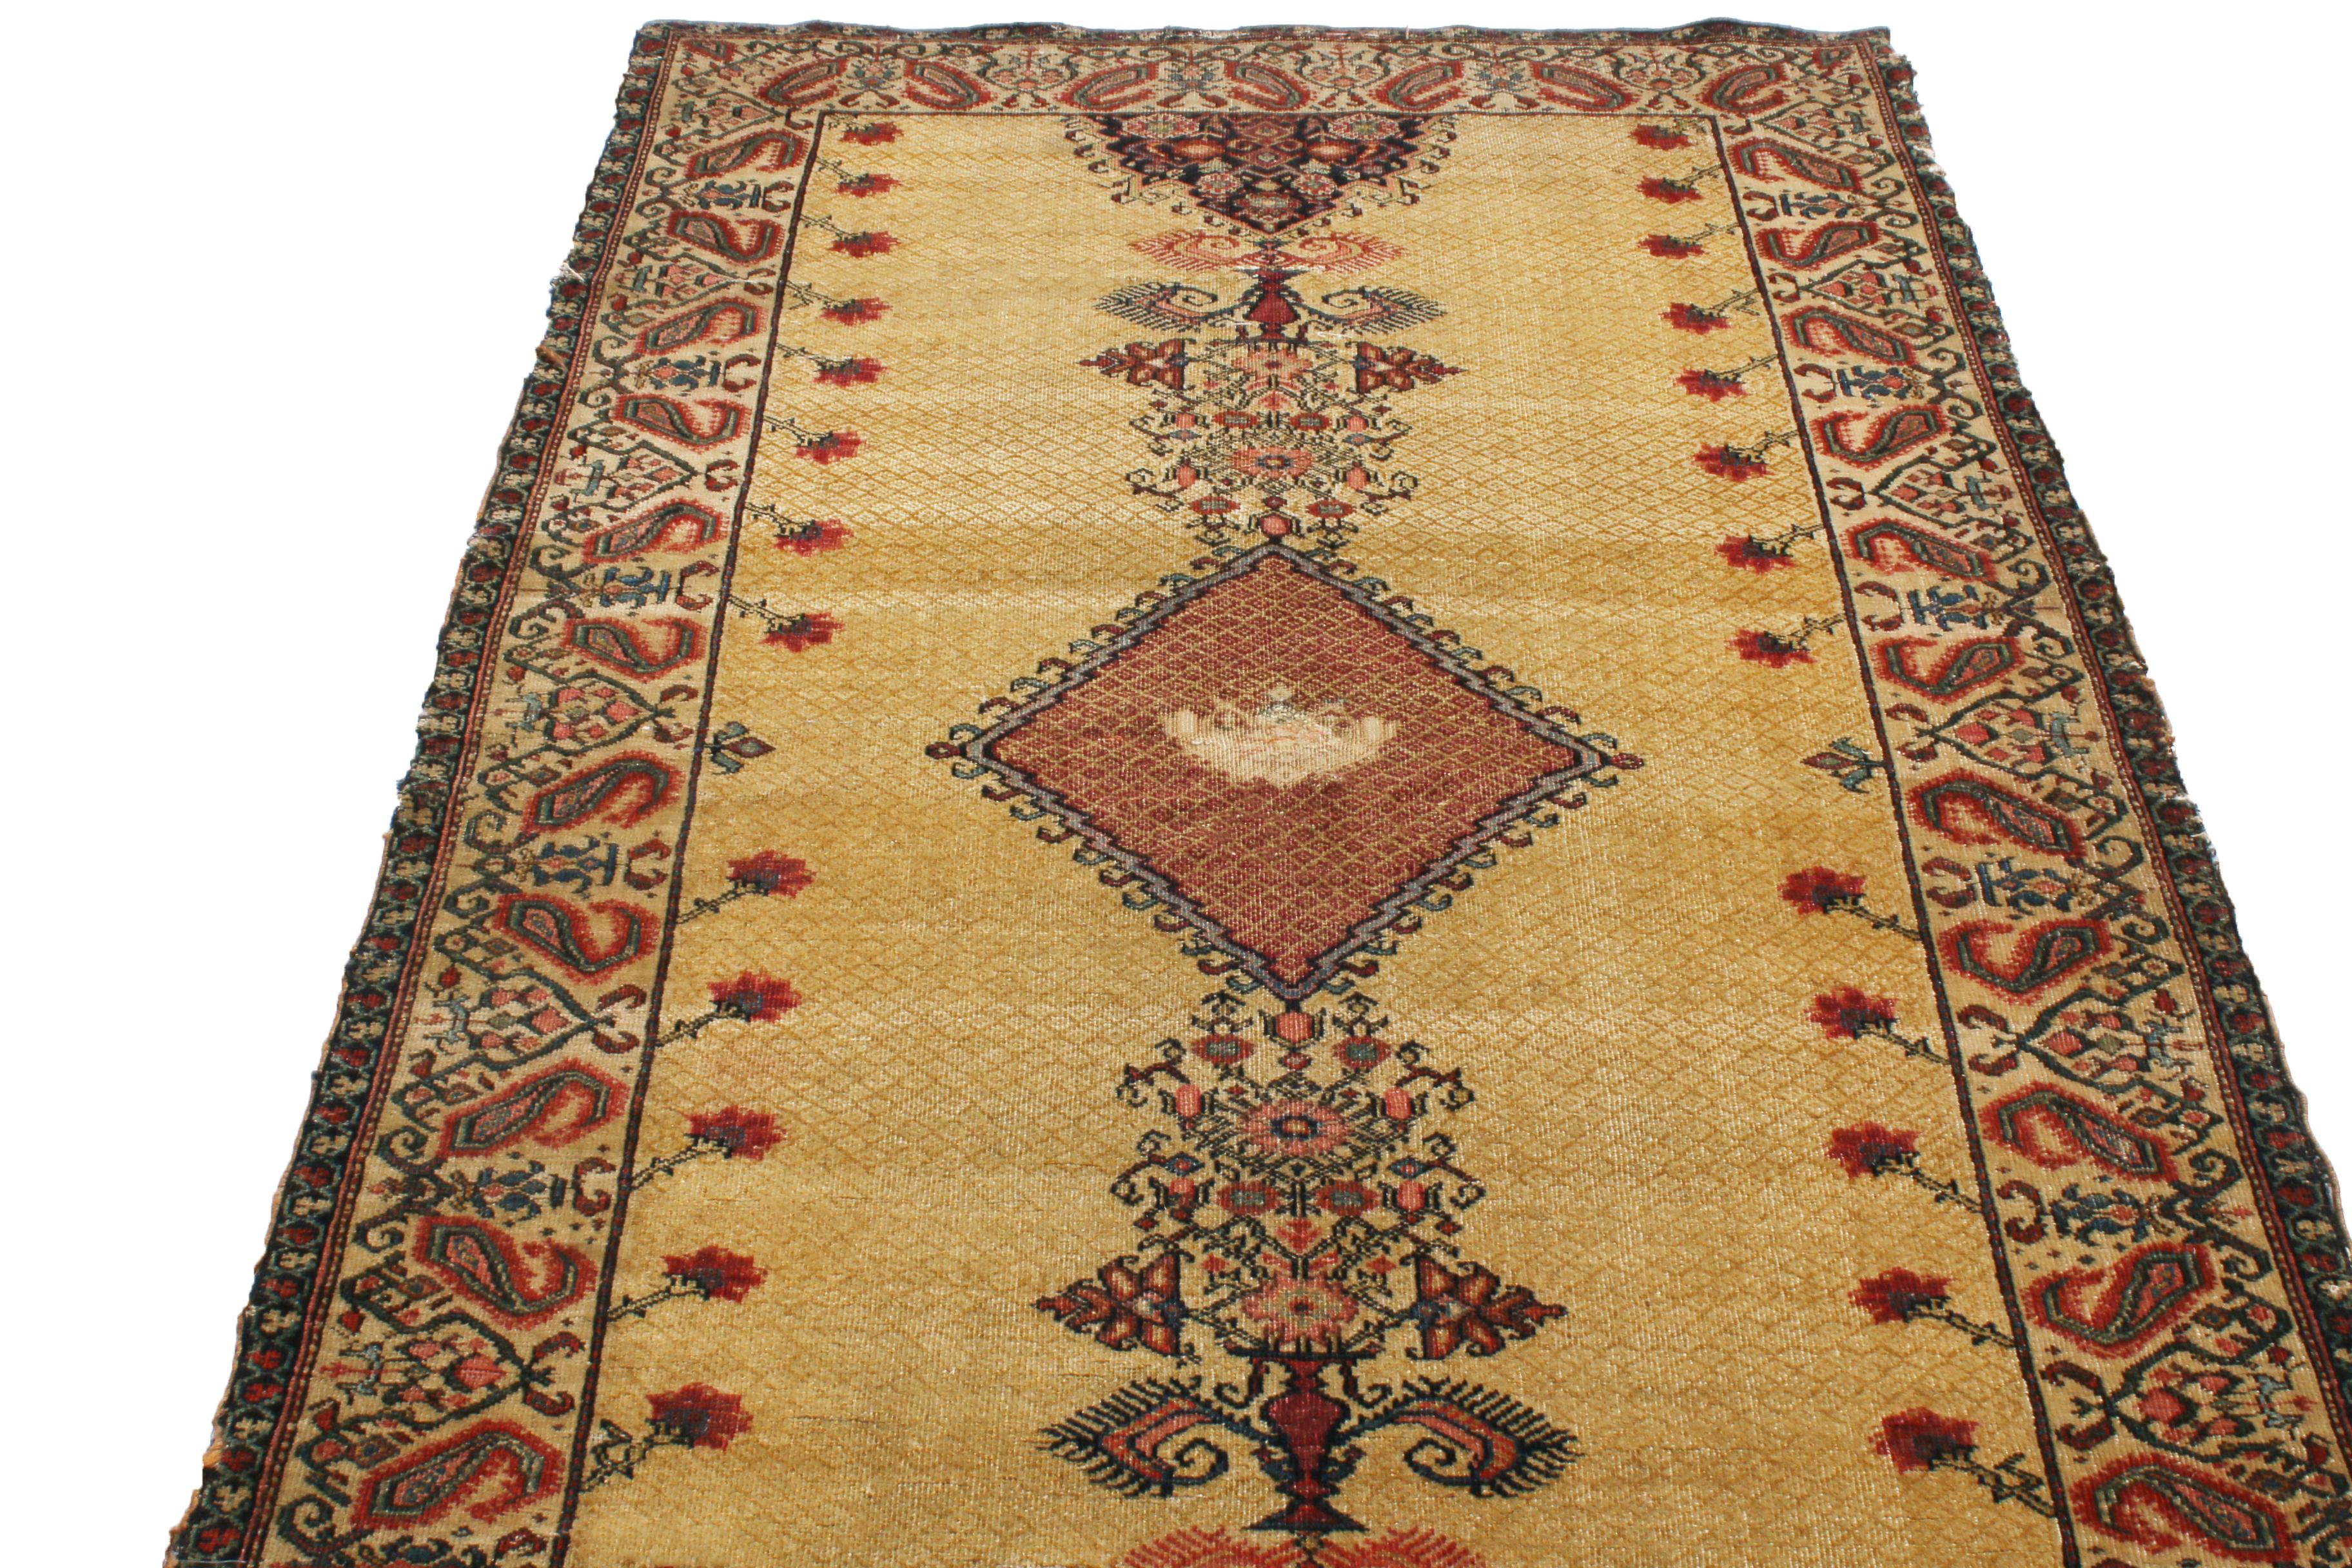 Originating from Persia between 1880-1900, this antique Sarouk Farahan Persian rug boasts hand knotted, high-quality wool and a distinguished field and border. Featuring a luminous golden-beige background shared by both the field and border